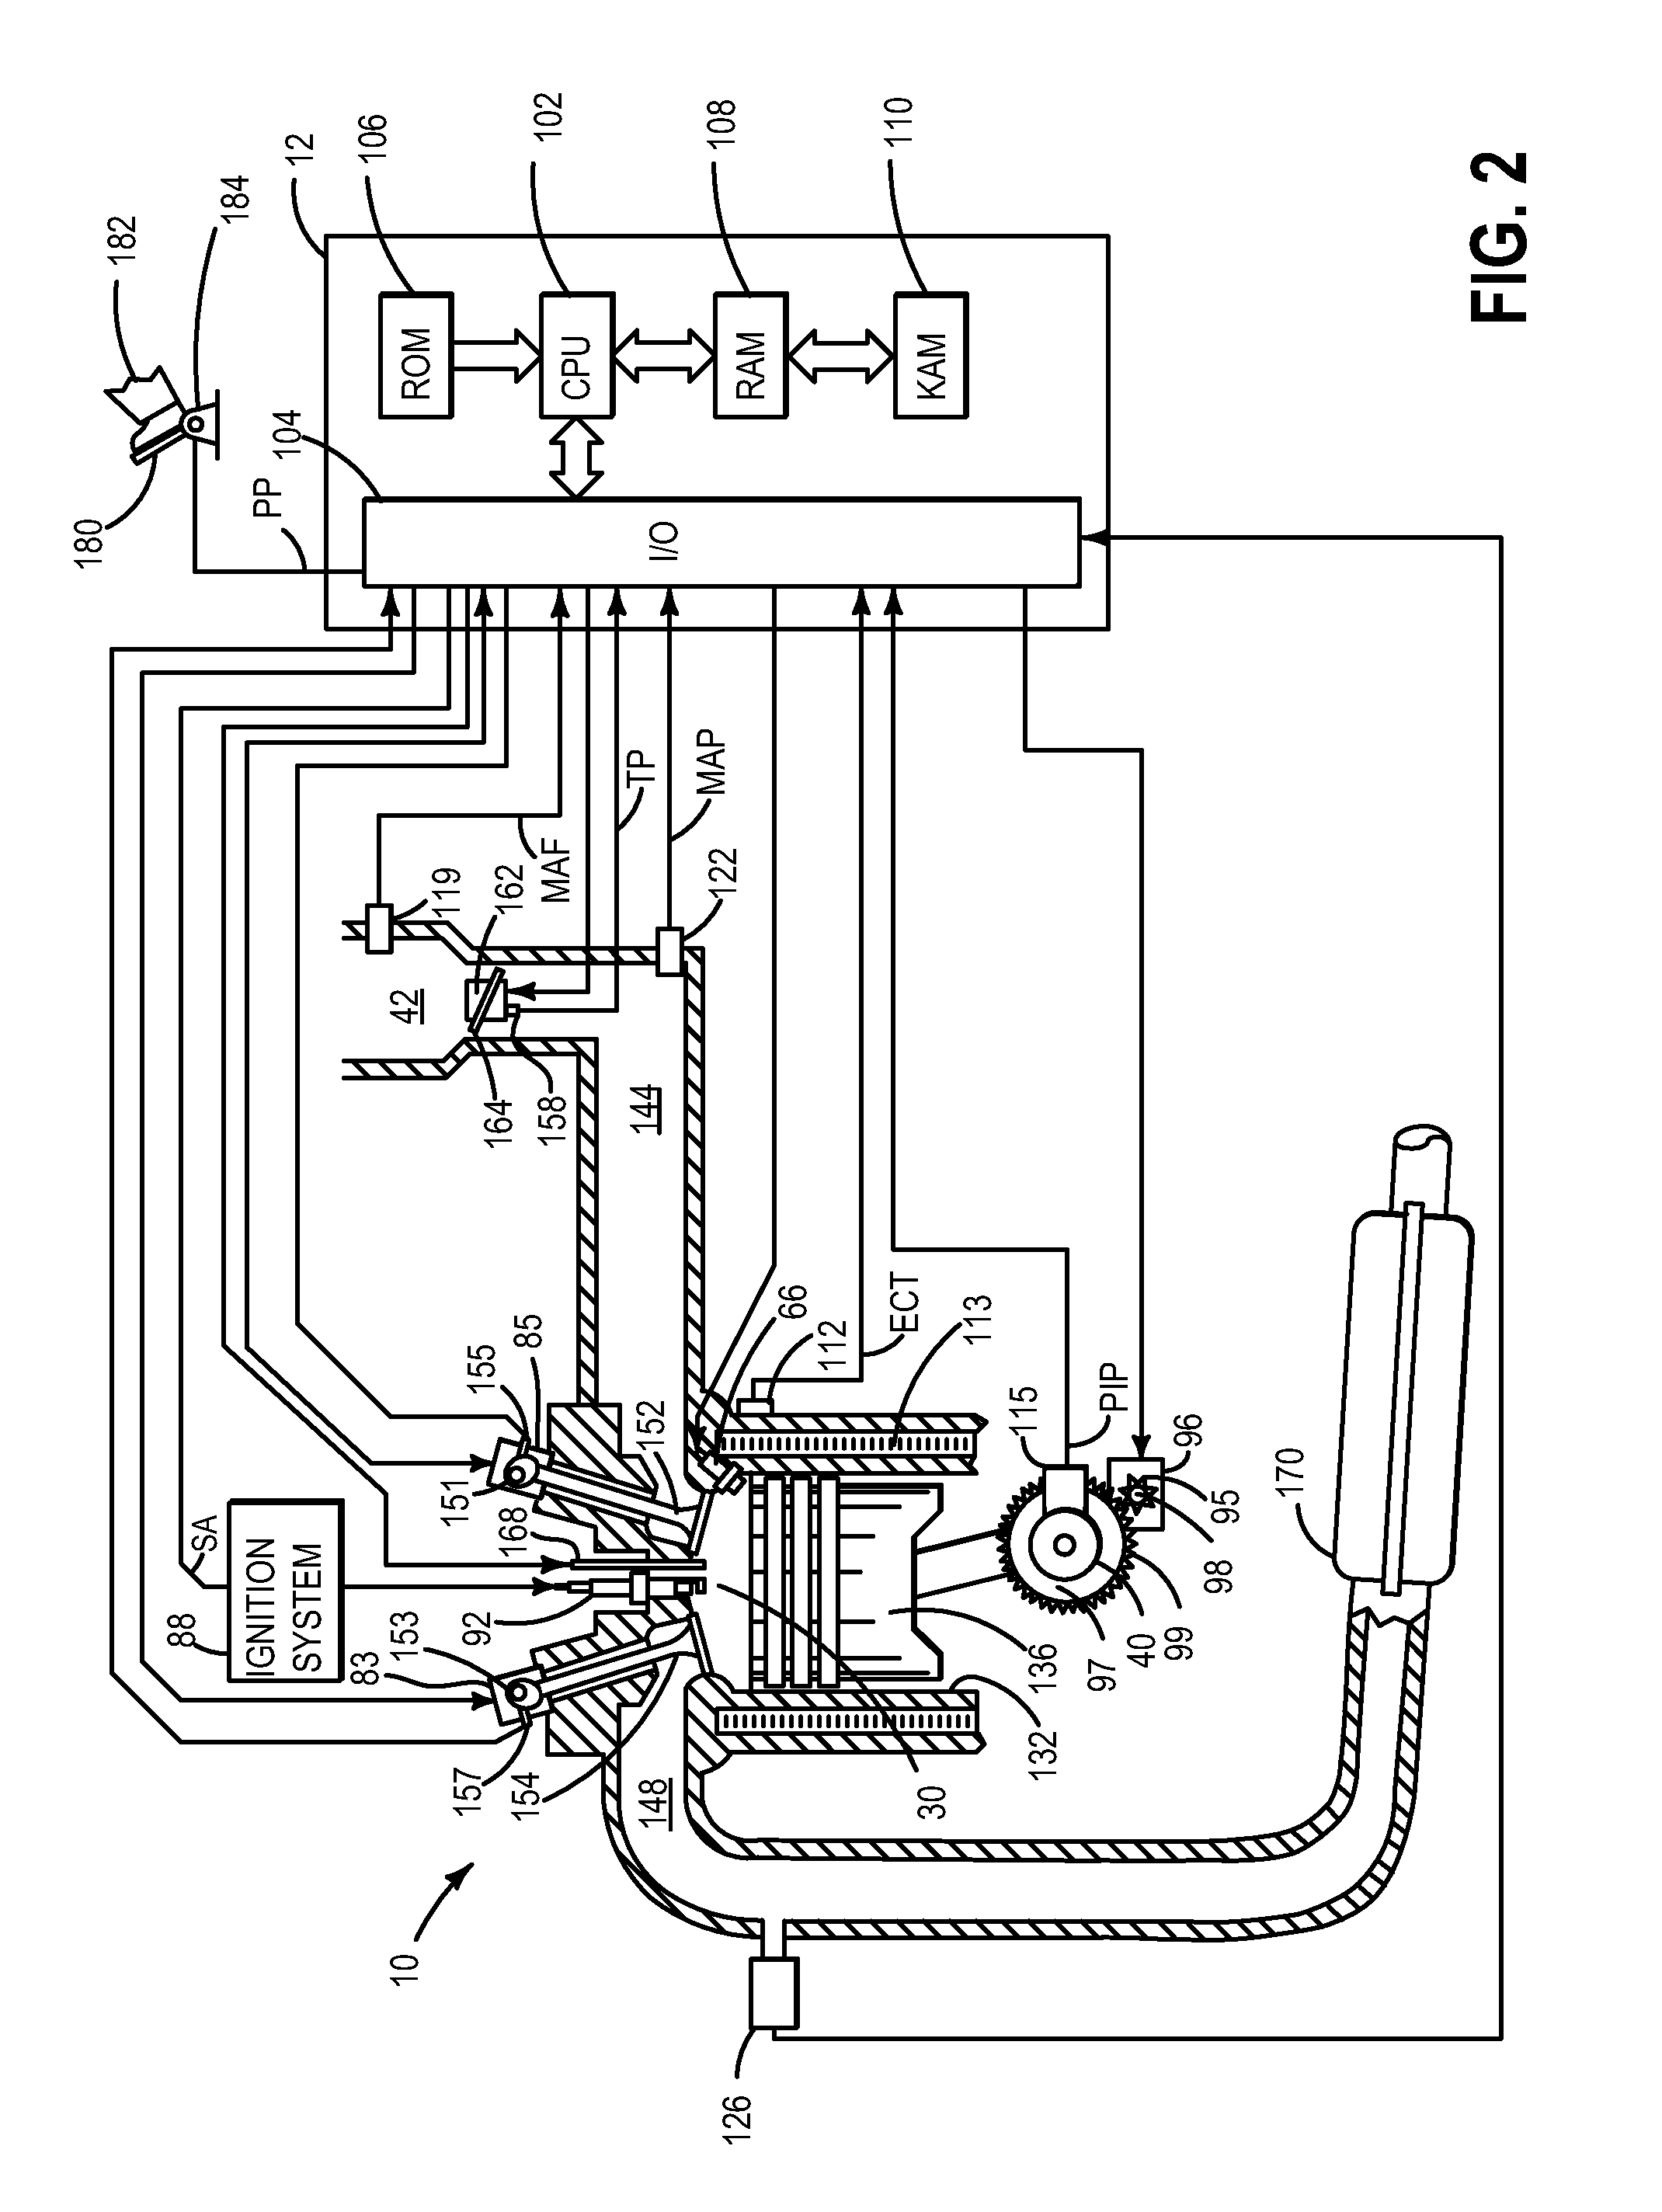 Systems and methods for egr control